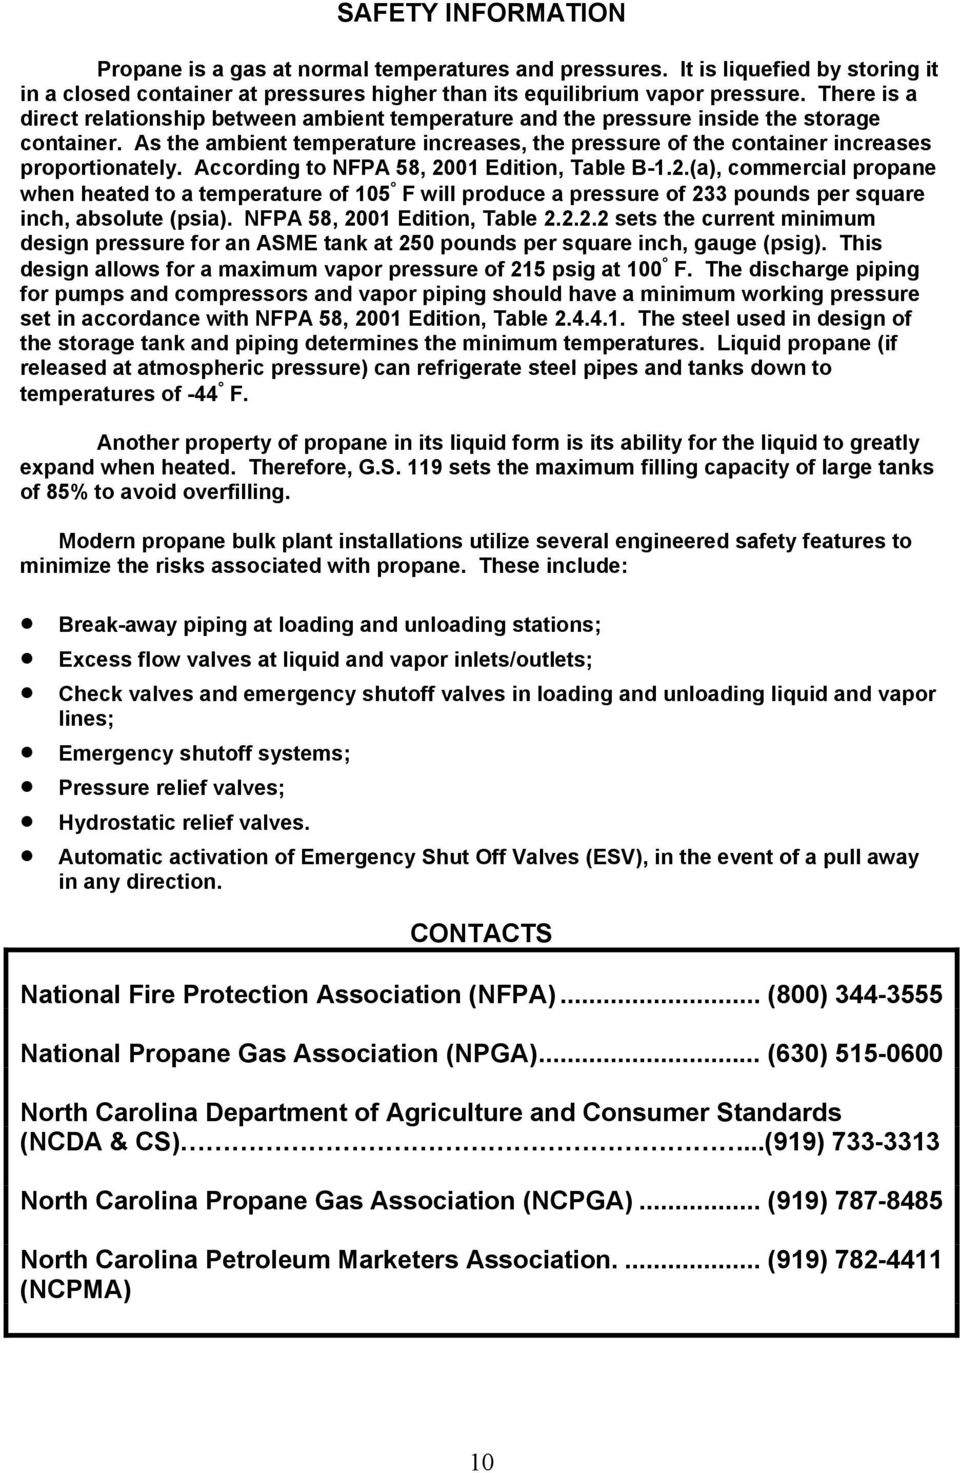 According to NFPA 58, 2001 Edition, Table B-1.2.(a), commercial propane when heated to a temperature of 105 F will produce a pressure of 233 pounds per square inch, absolute (psia).